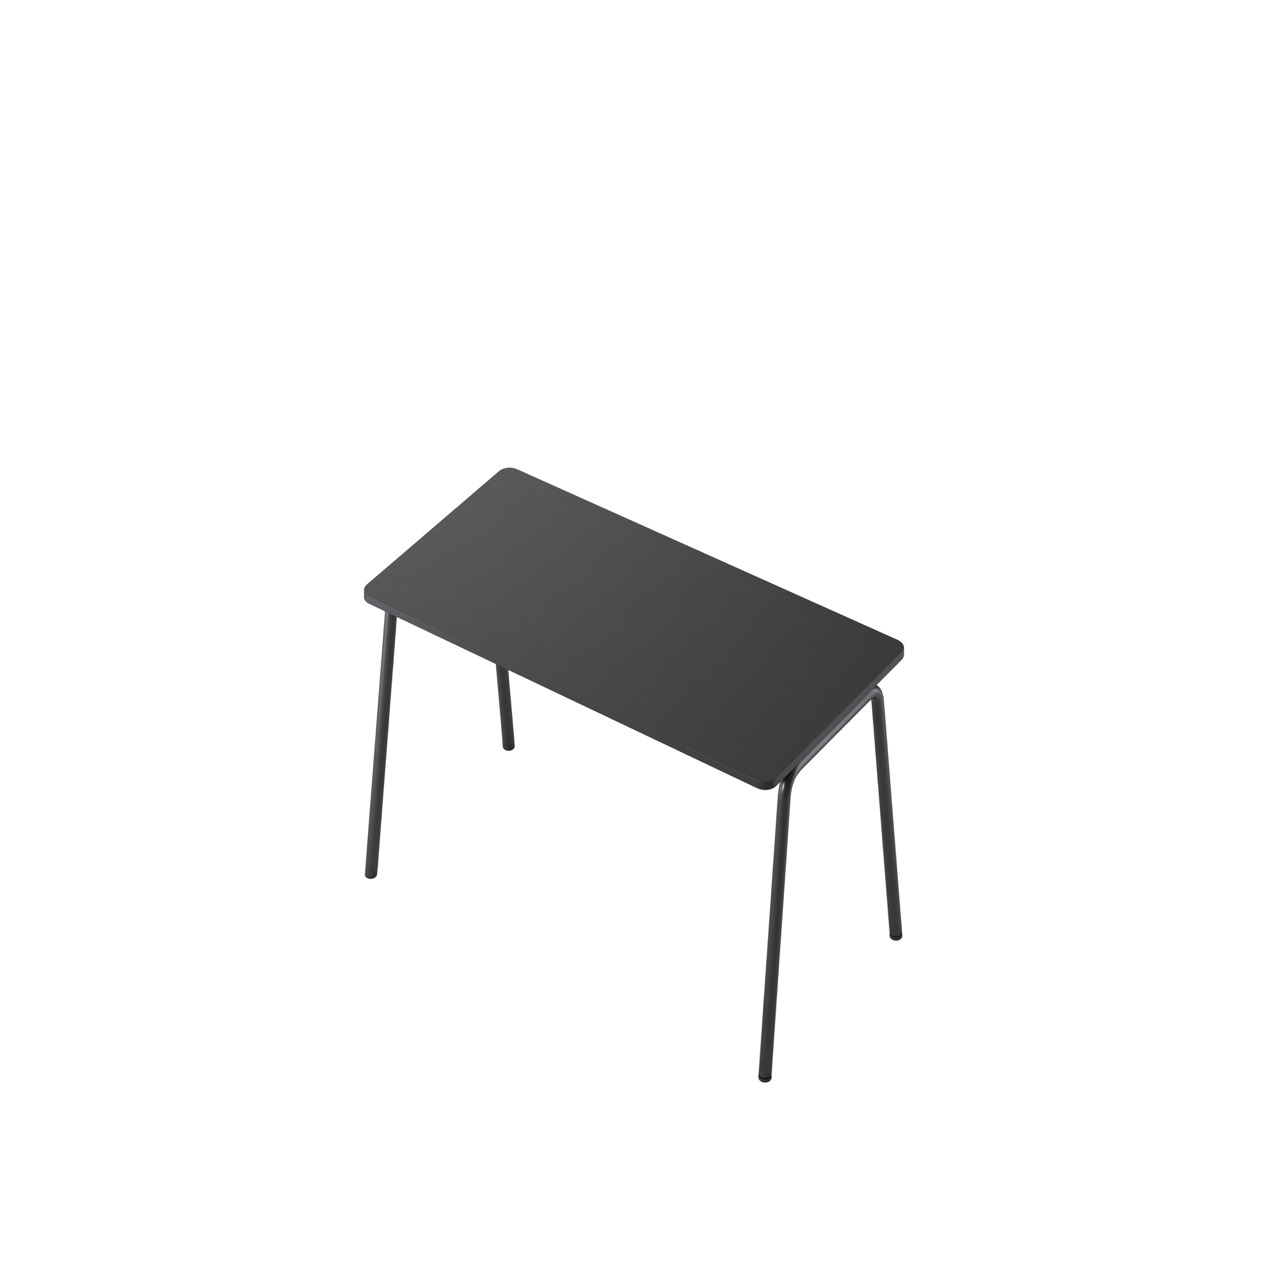 OCEE&FOUR - Tables - FourReal 74 - 128 x 64 - Angled - Packshot Image 1 Large